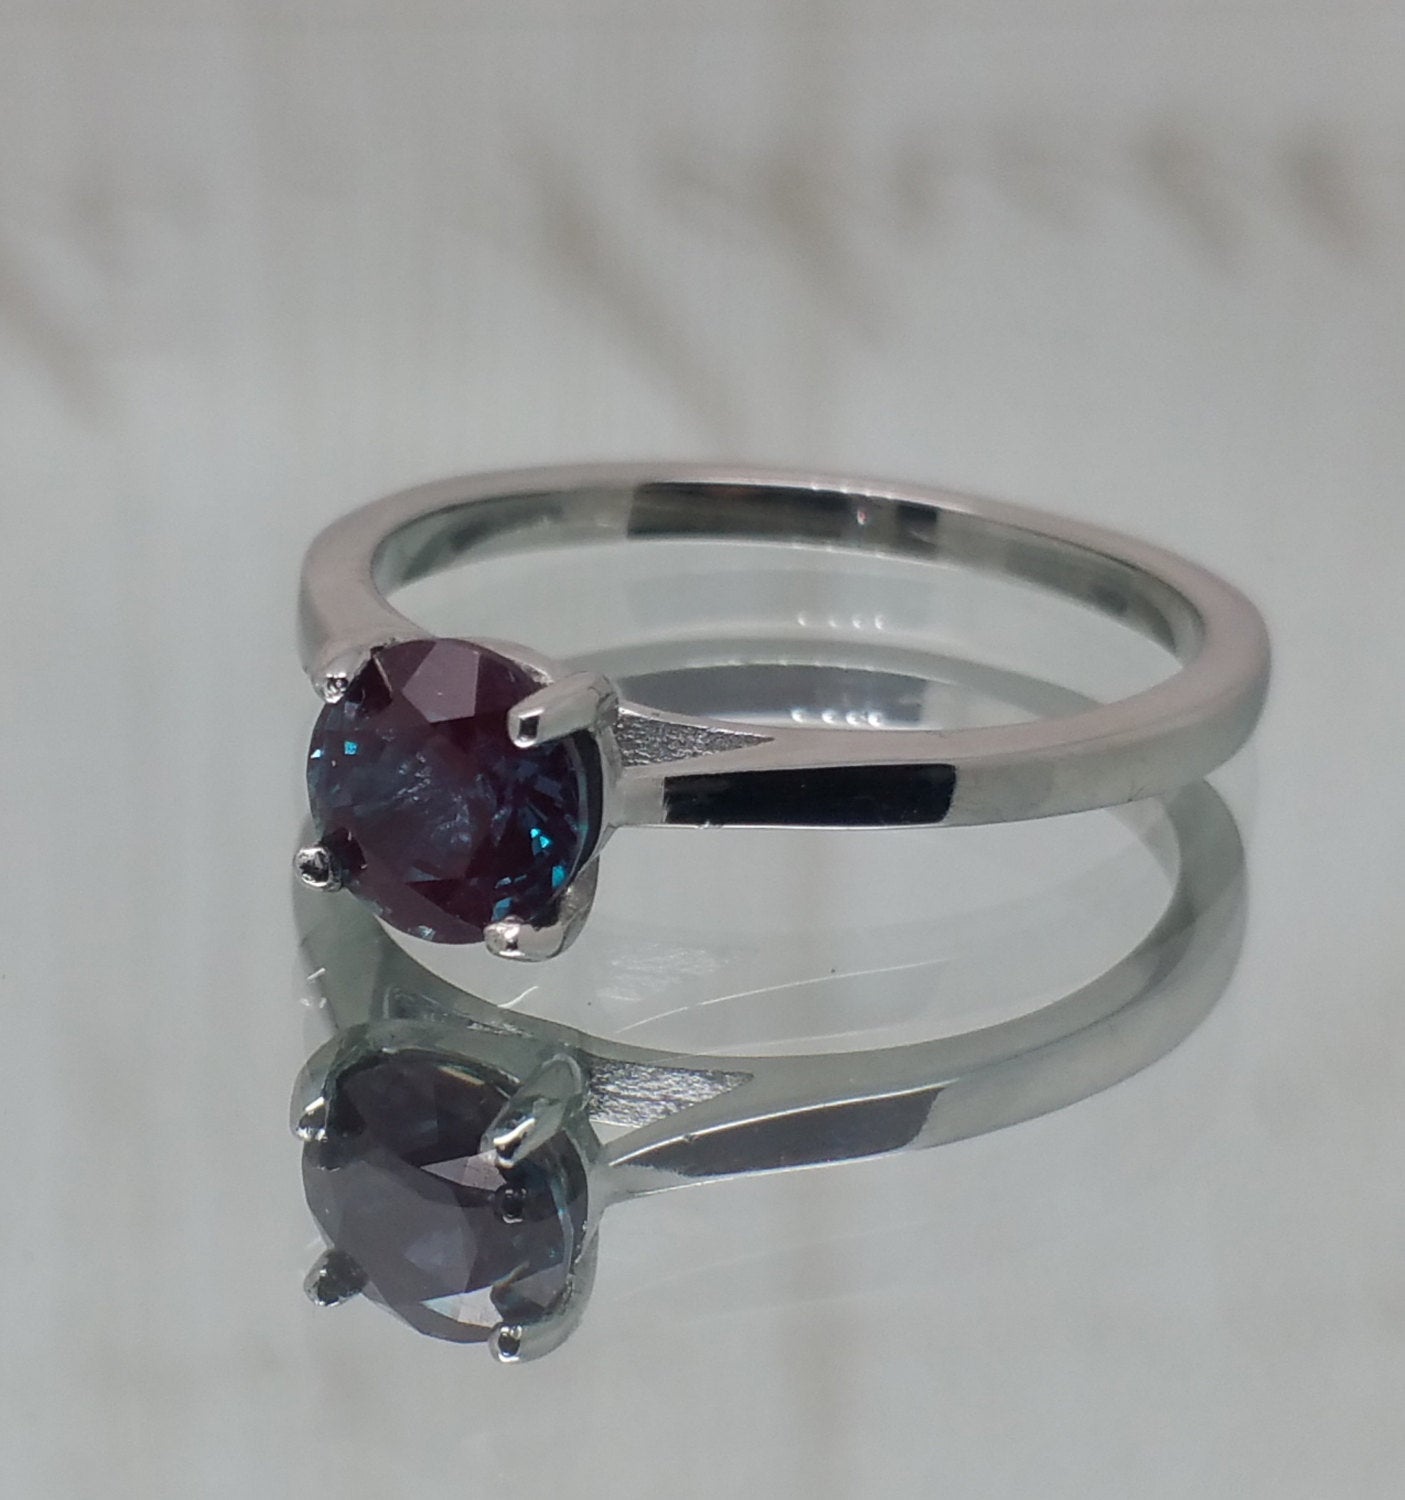 Natural 1ct Alexandrite solitaire ring in Titanium or White Gold - engagement ring - wedding ring - handmade ring